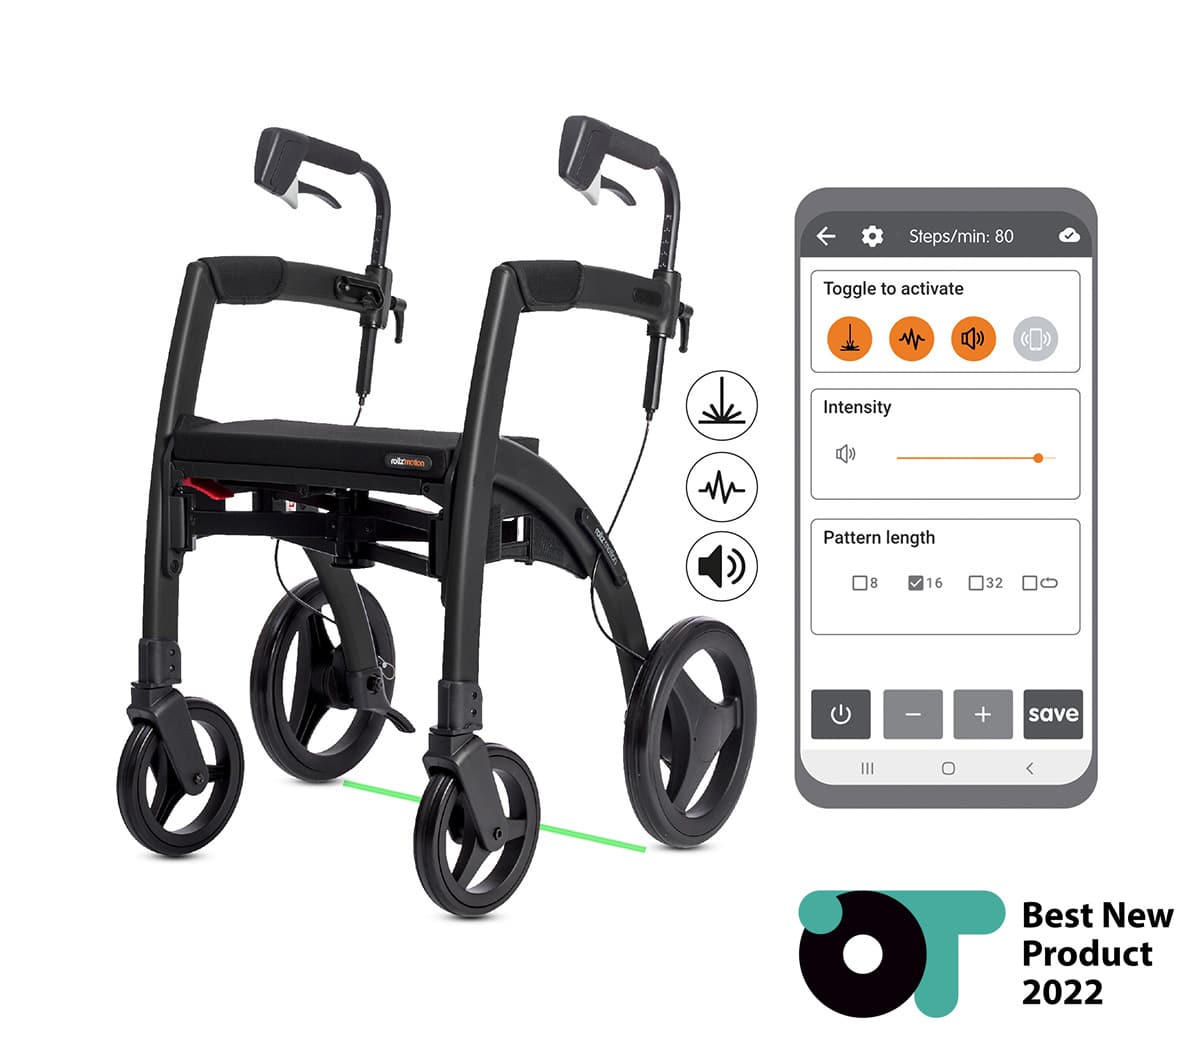 Parkinson's rollator awarded Best New Product 2022 at the OT Show in the UK